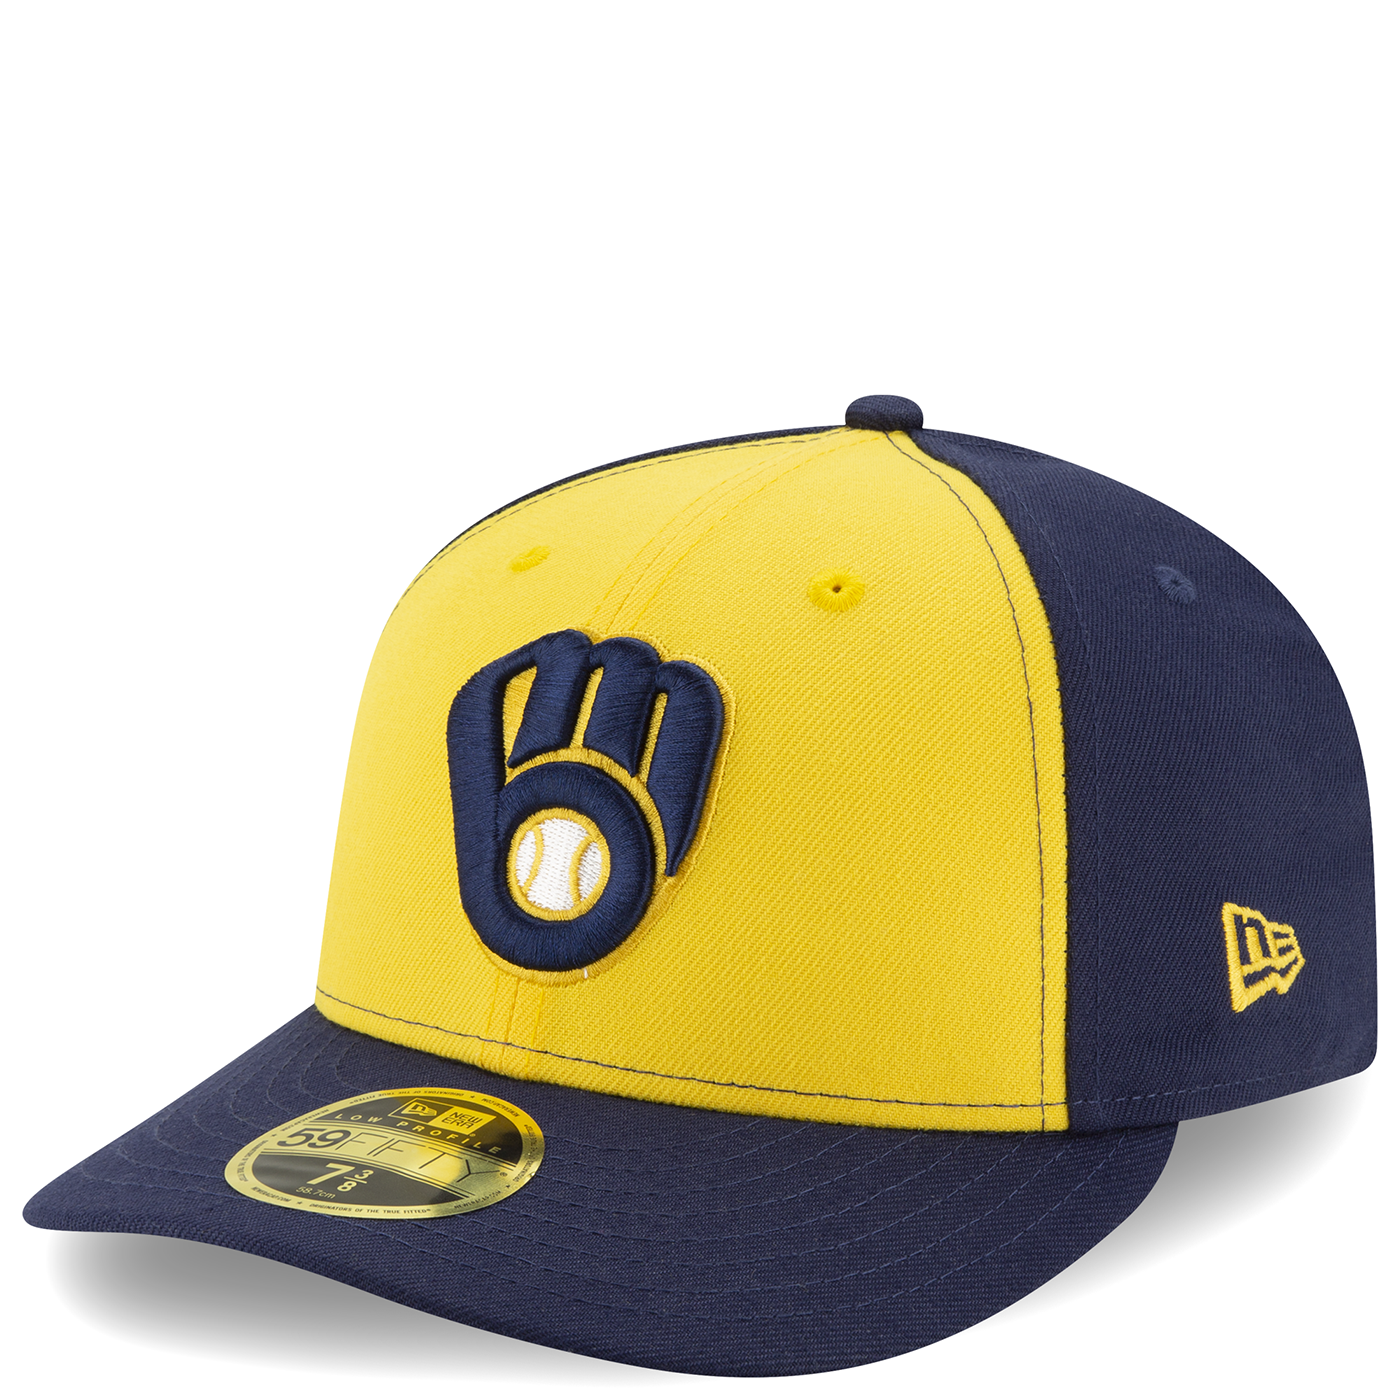 Men's New Era Navy/Yellow Milwaukee Brewers Alternate 2020 Authentic Collection On-Field Low Profile Fitted Hat